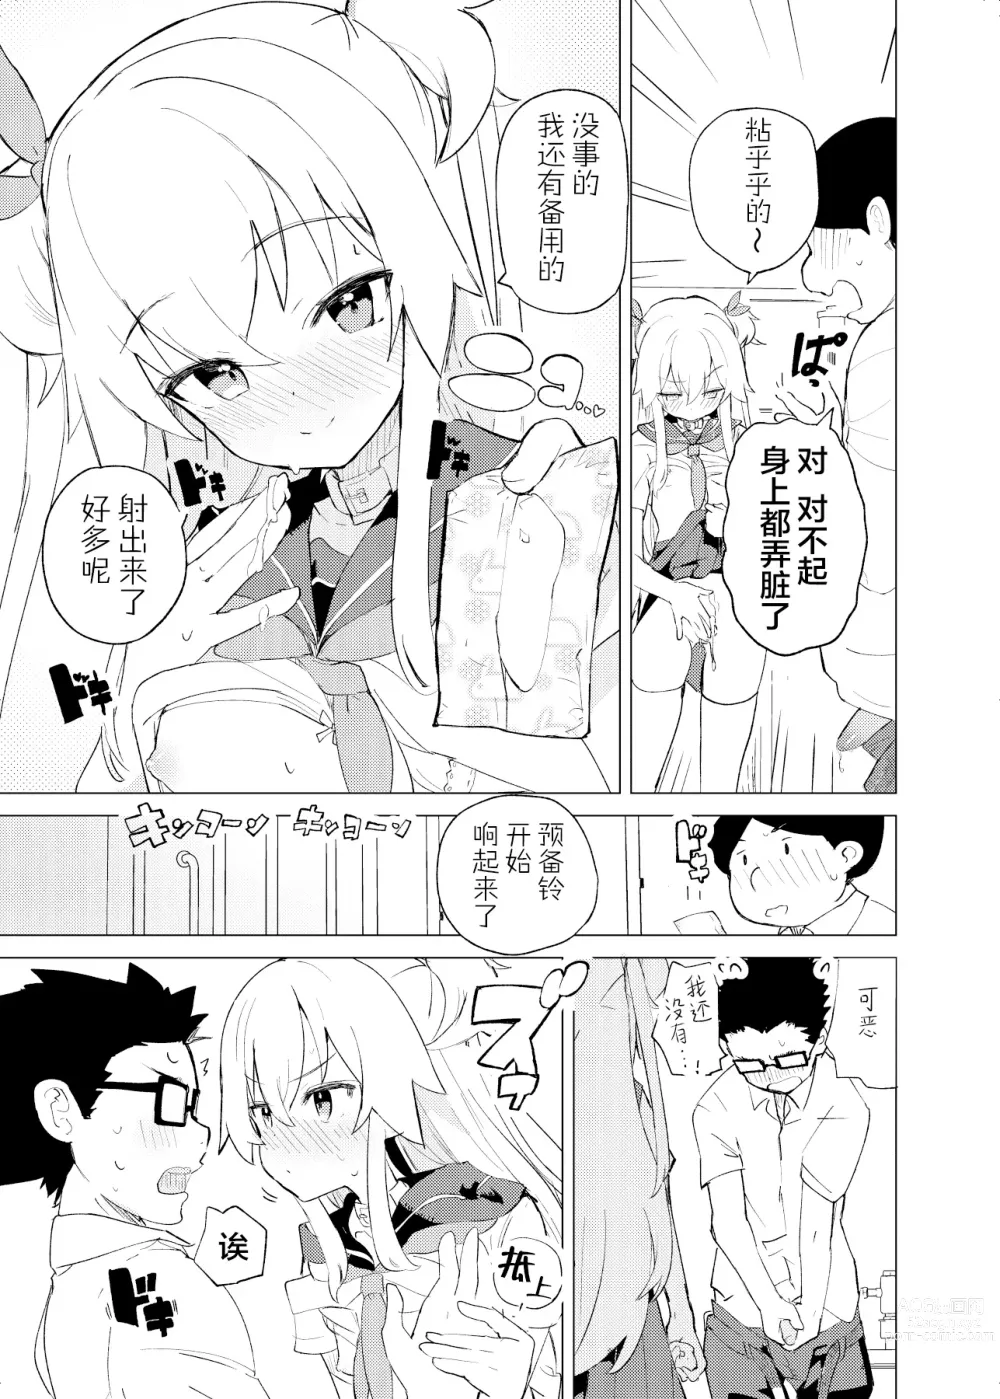 Page 12 of doujinshi S.S.S.DI2